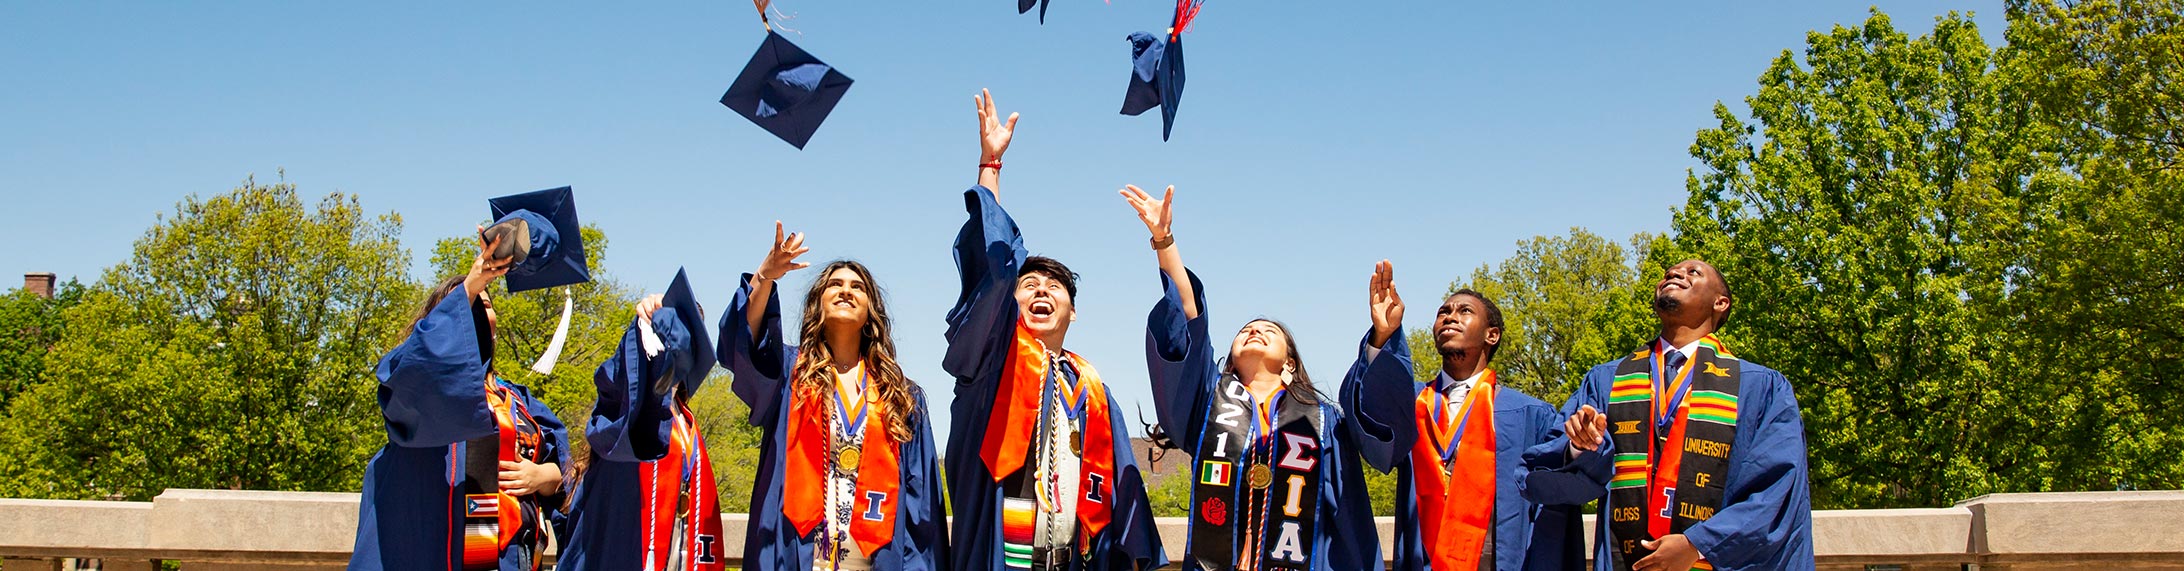 background image of students at graduation